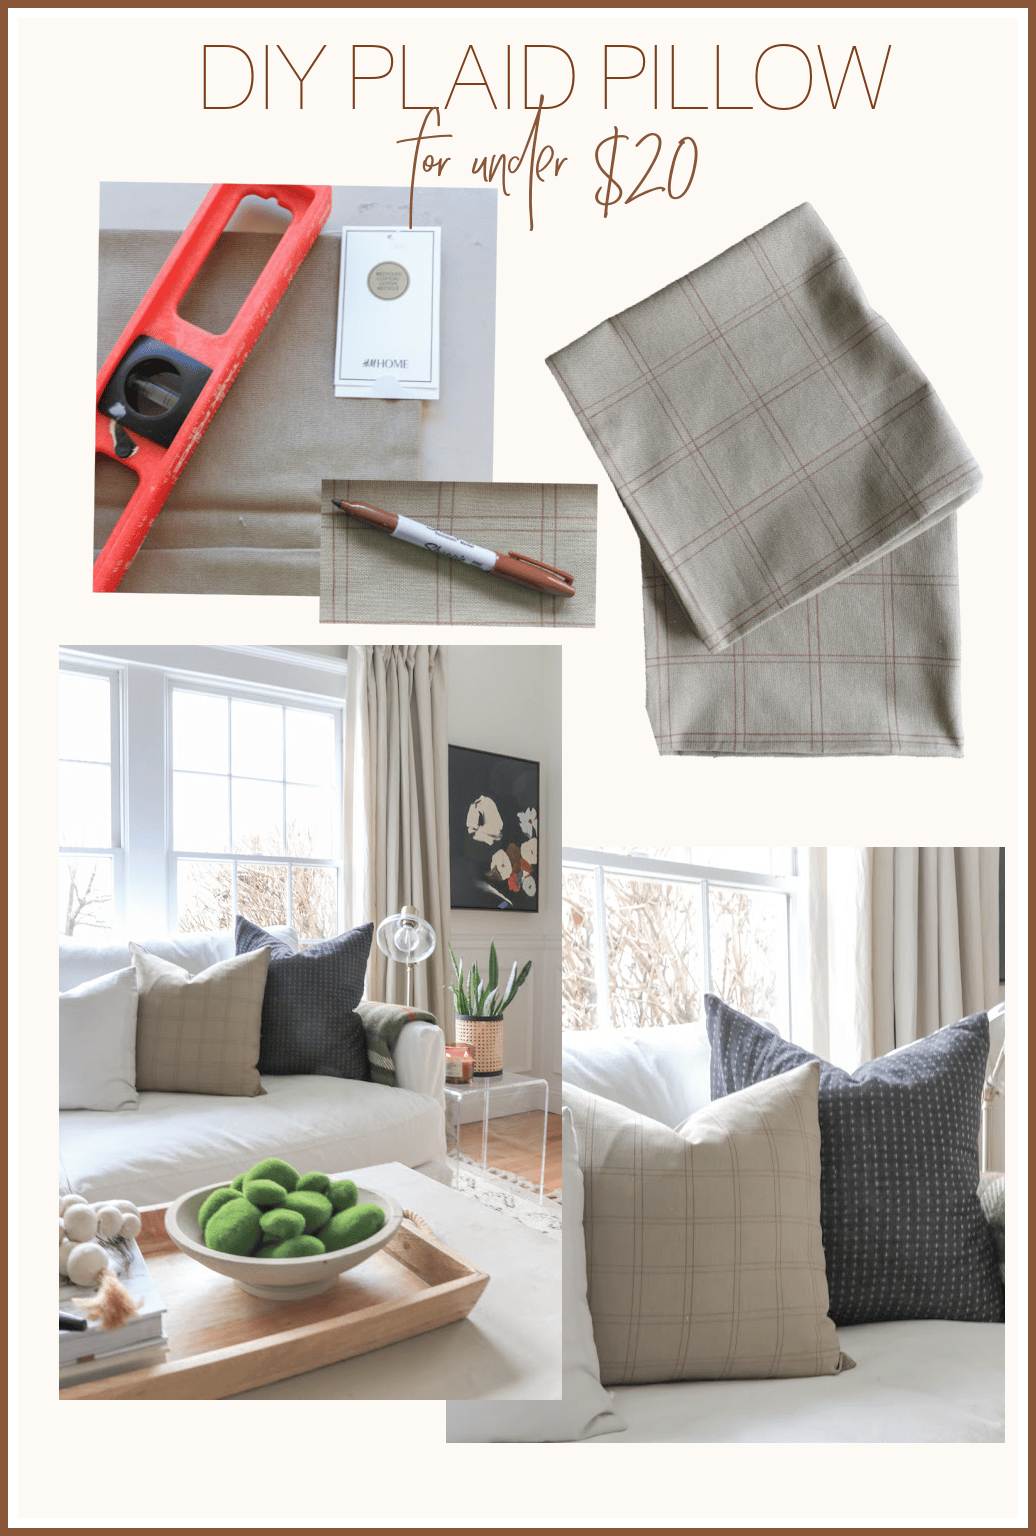 DIY Plaid Pillows and Moss Stones